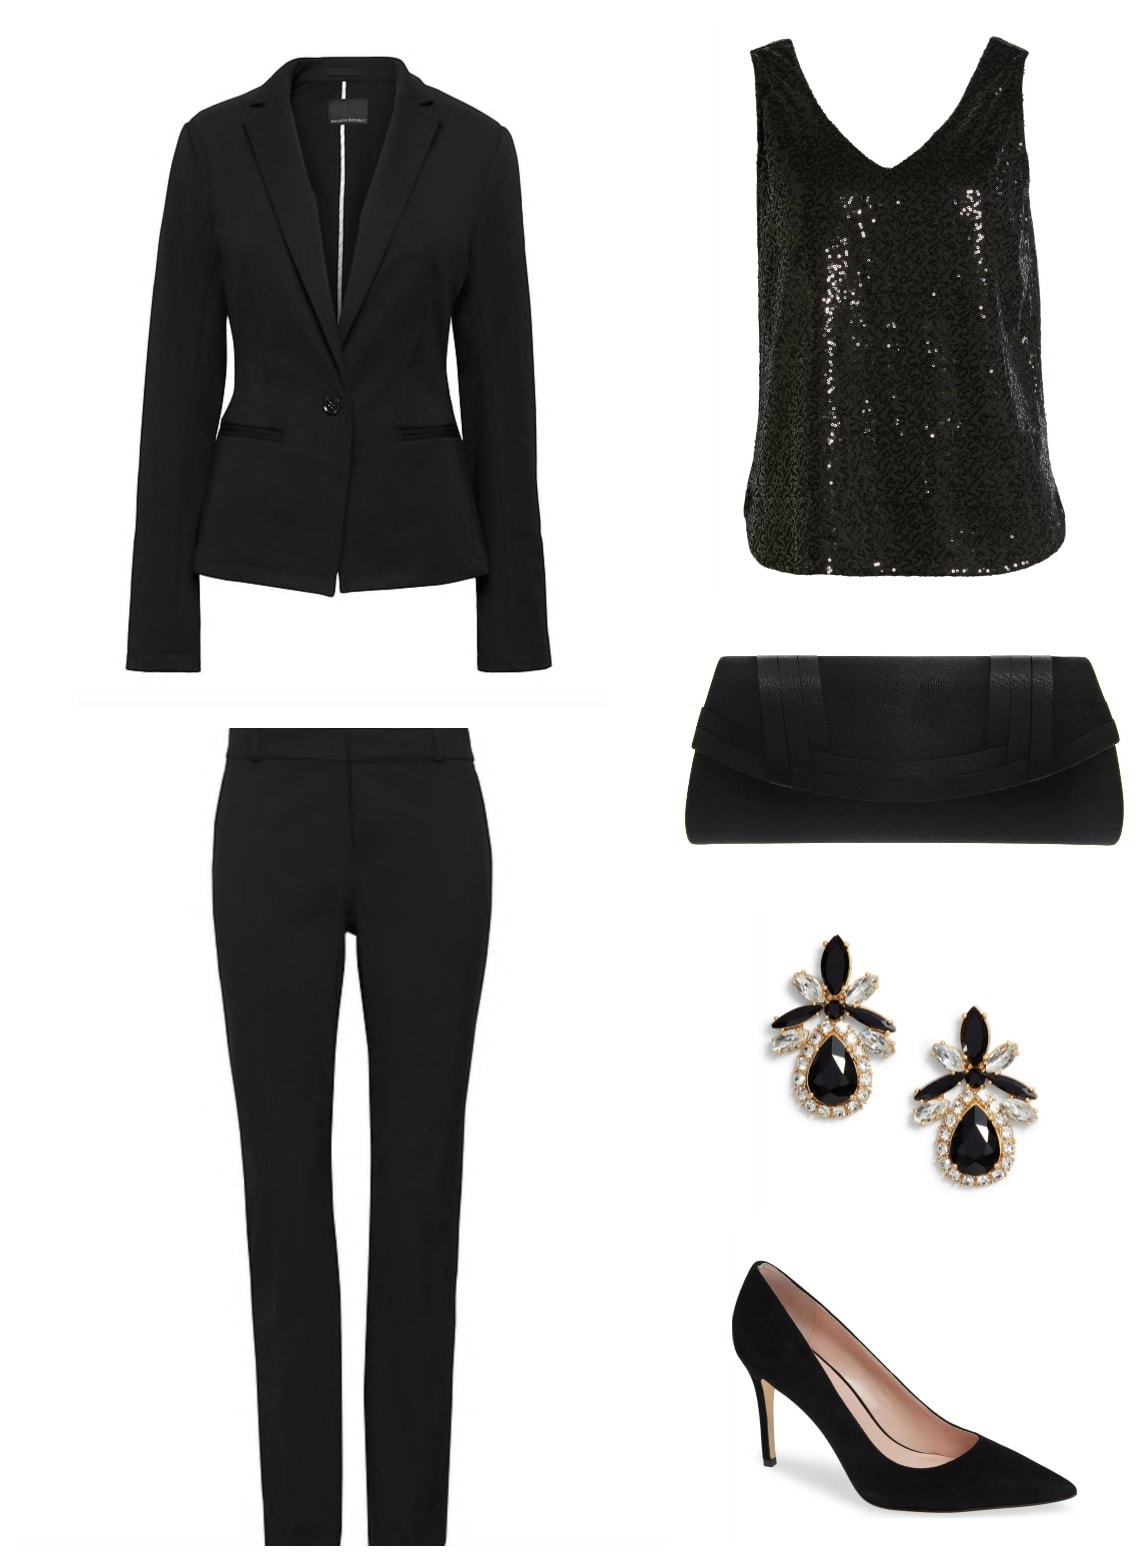 Delicate earrings and a subtle clutch make this cocktail pantsuit look more reserved for a work function.